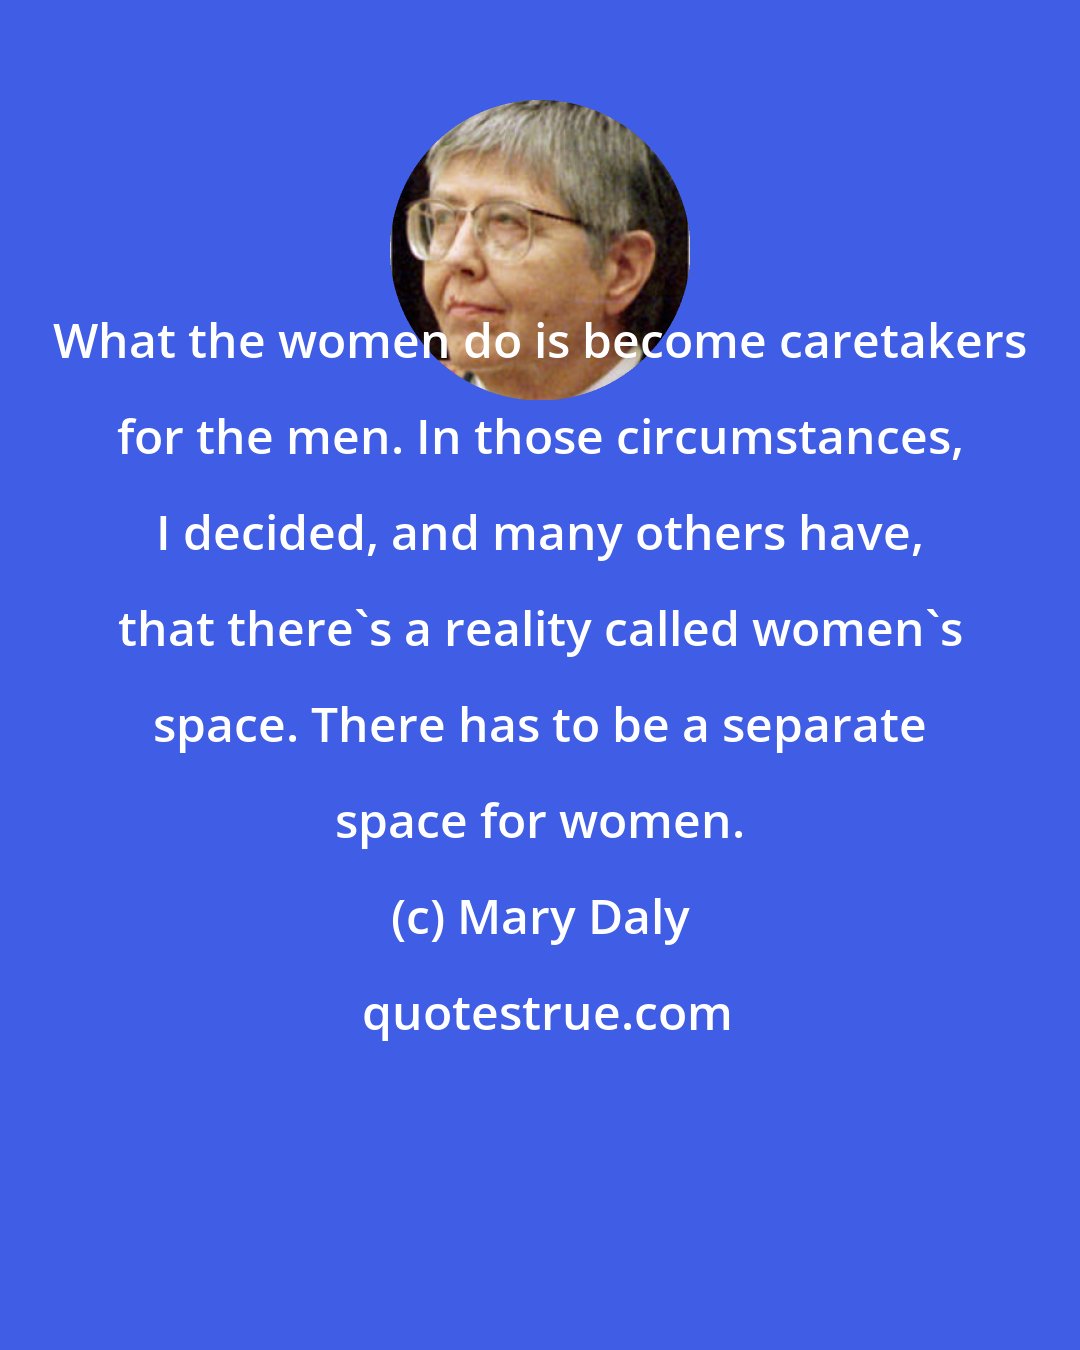 Mary Daly: What the women do is become caretakers for the men. In those circumstances, I decided, and many others have, that there's a reality called women's space. There has to be a separate space for women.